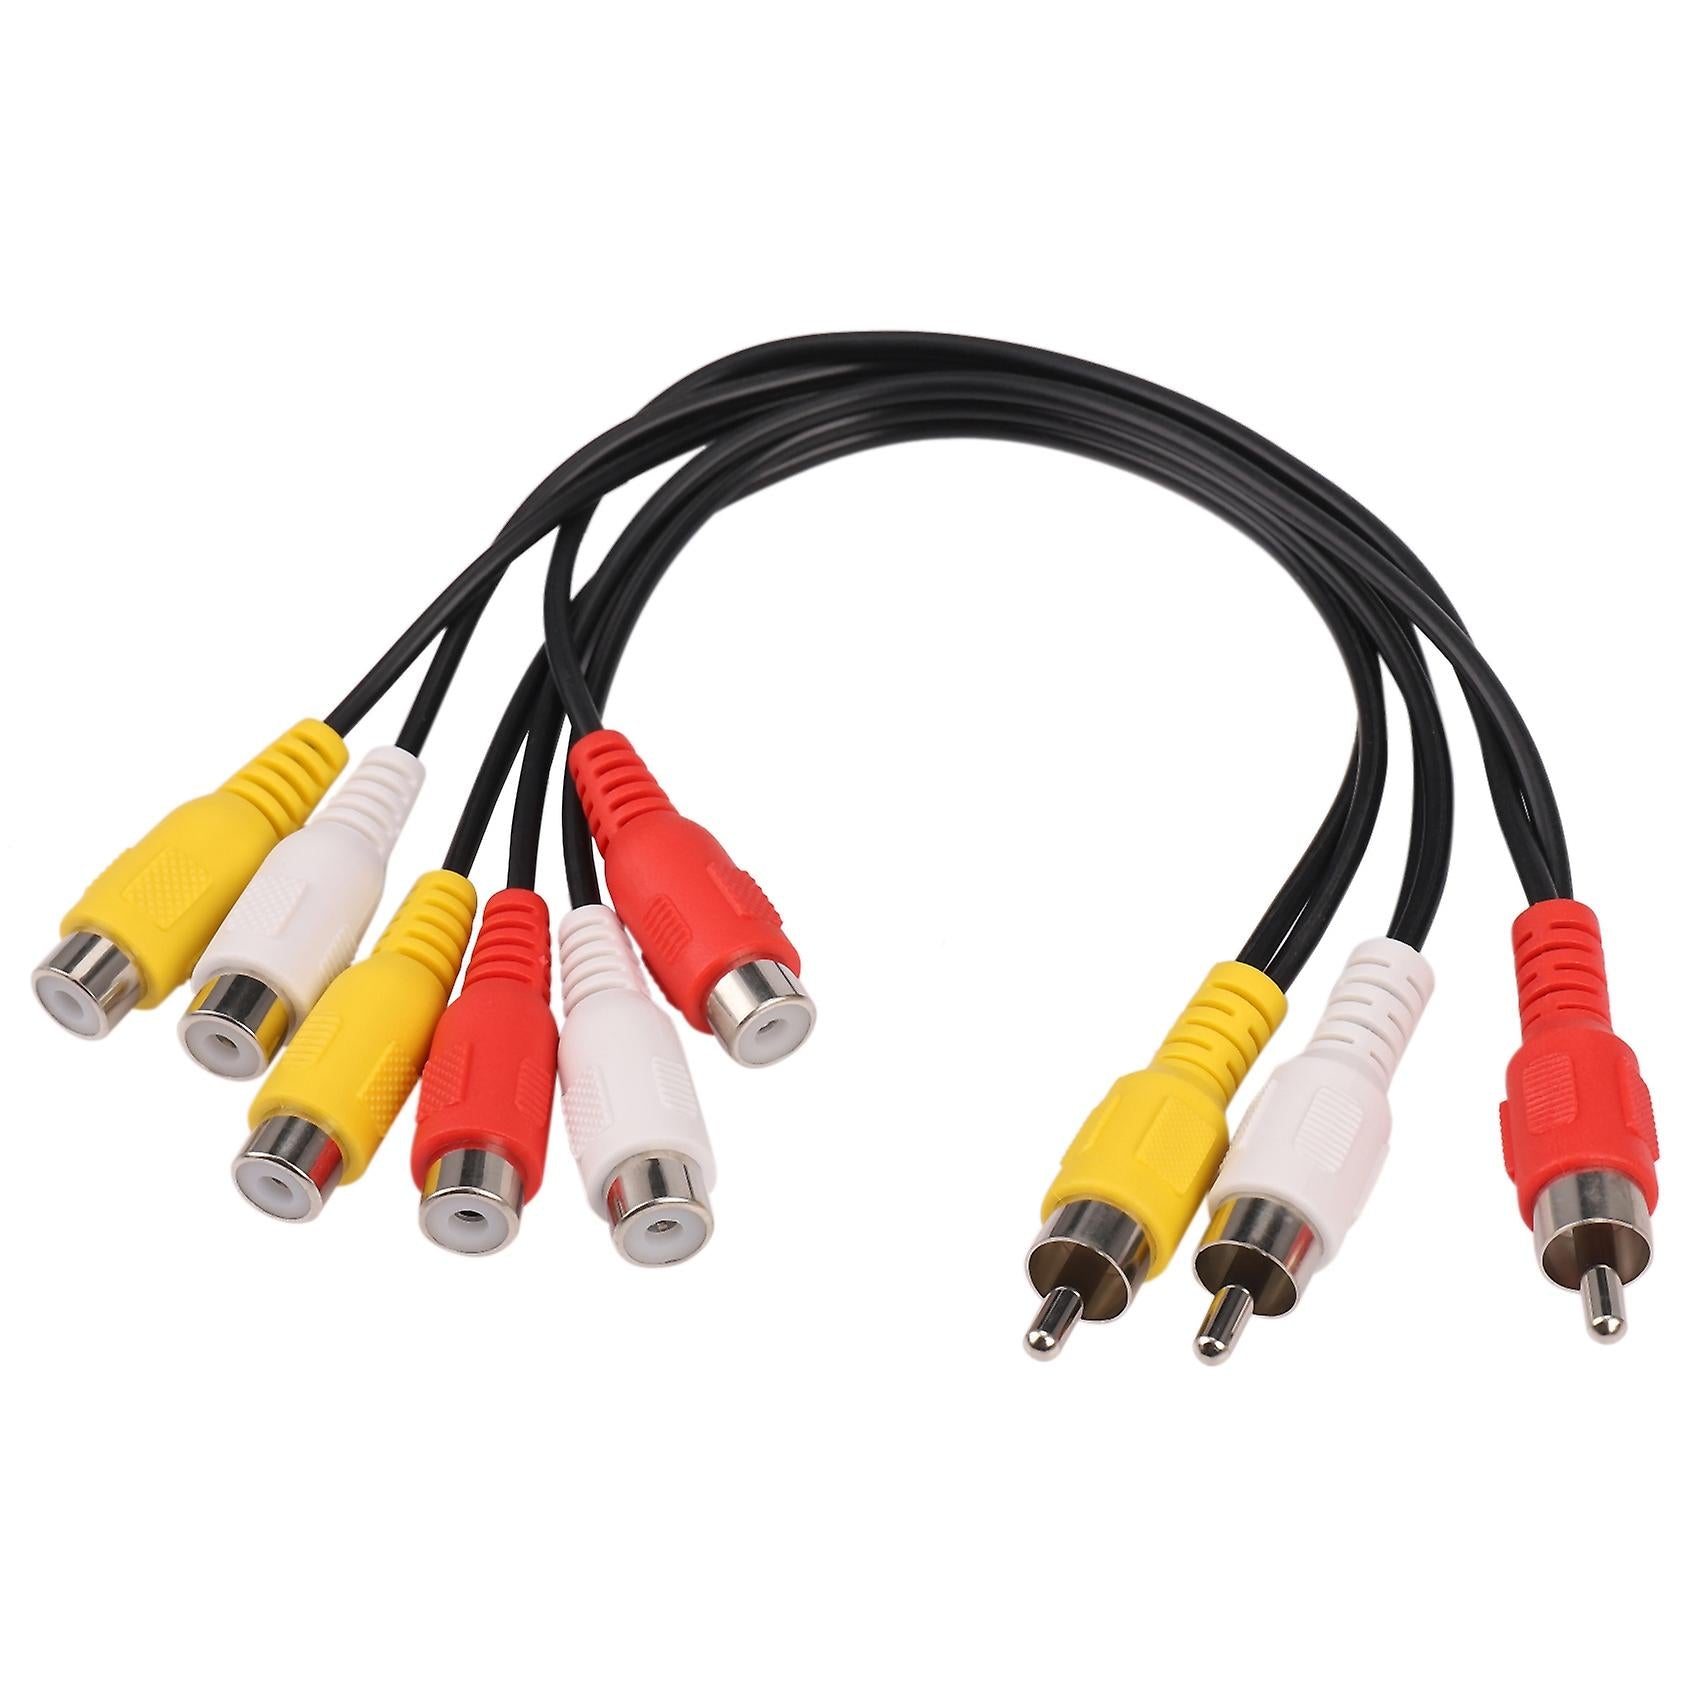 3 RCA Male to 6 RCA Female Audio Video Composite Extension AV Cable